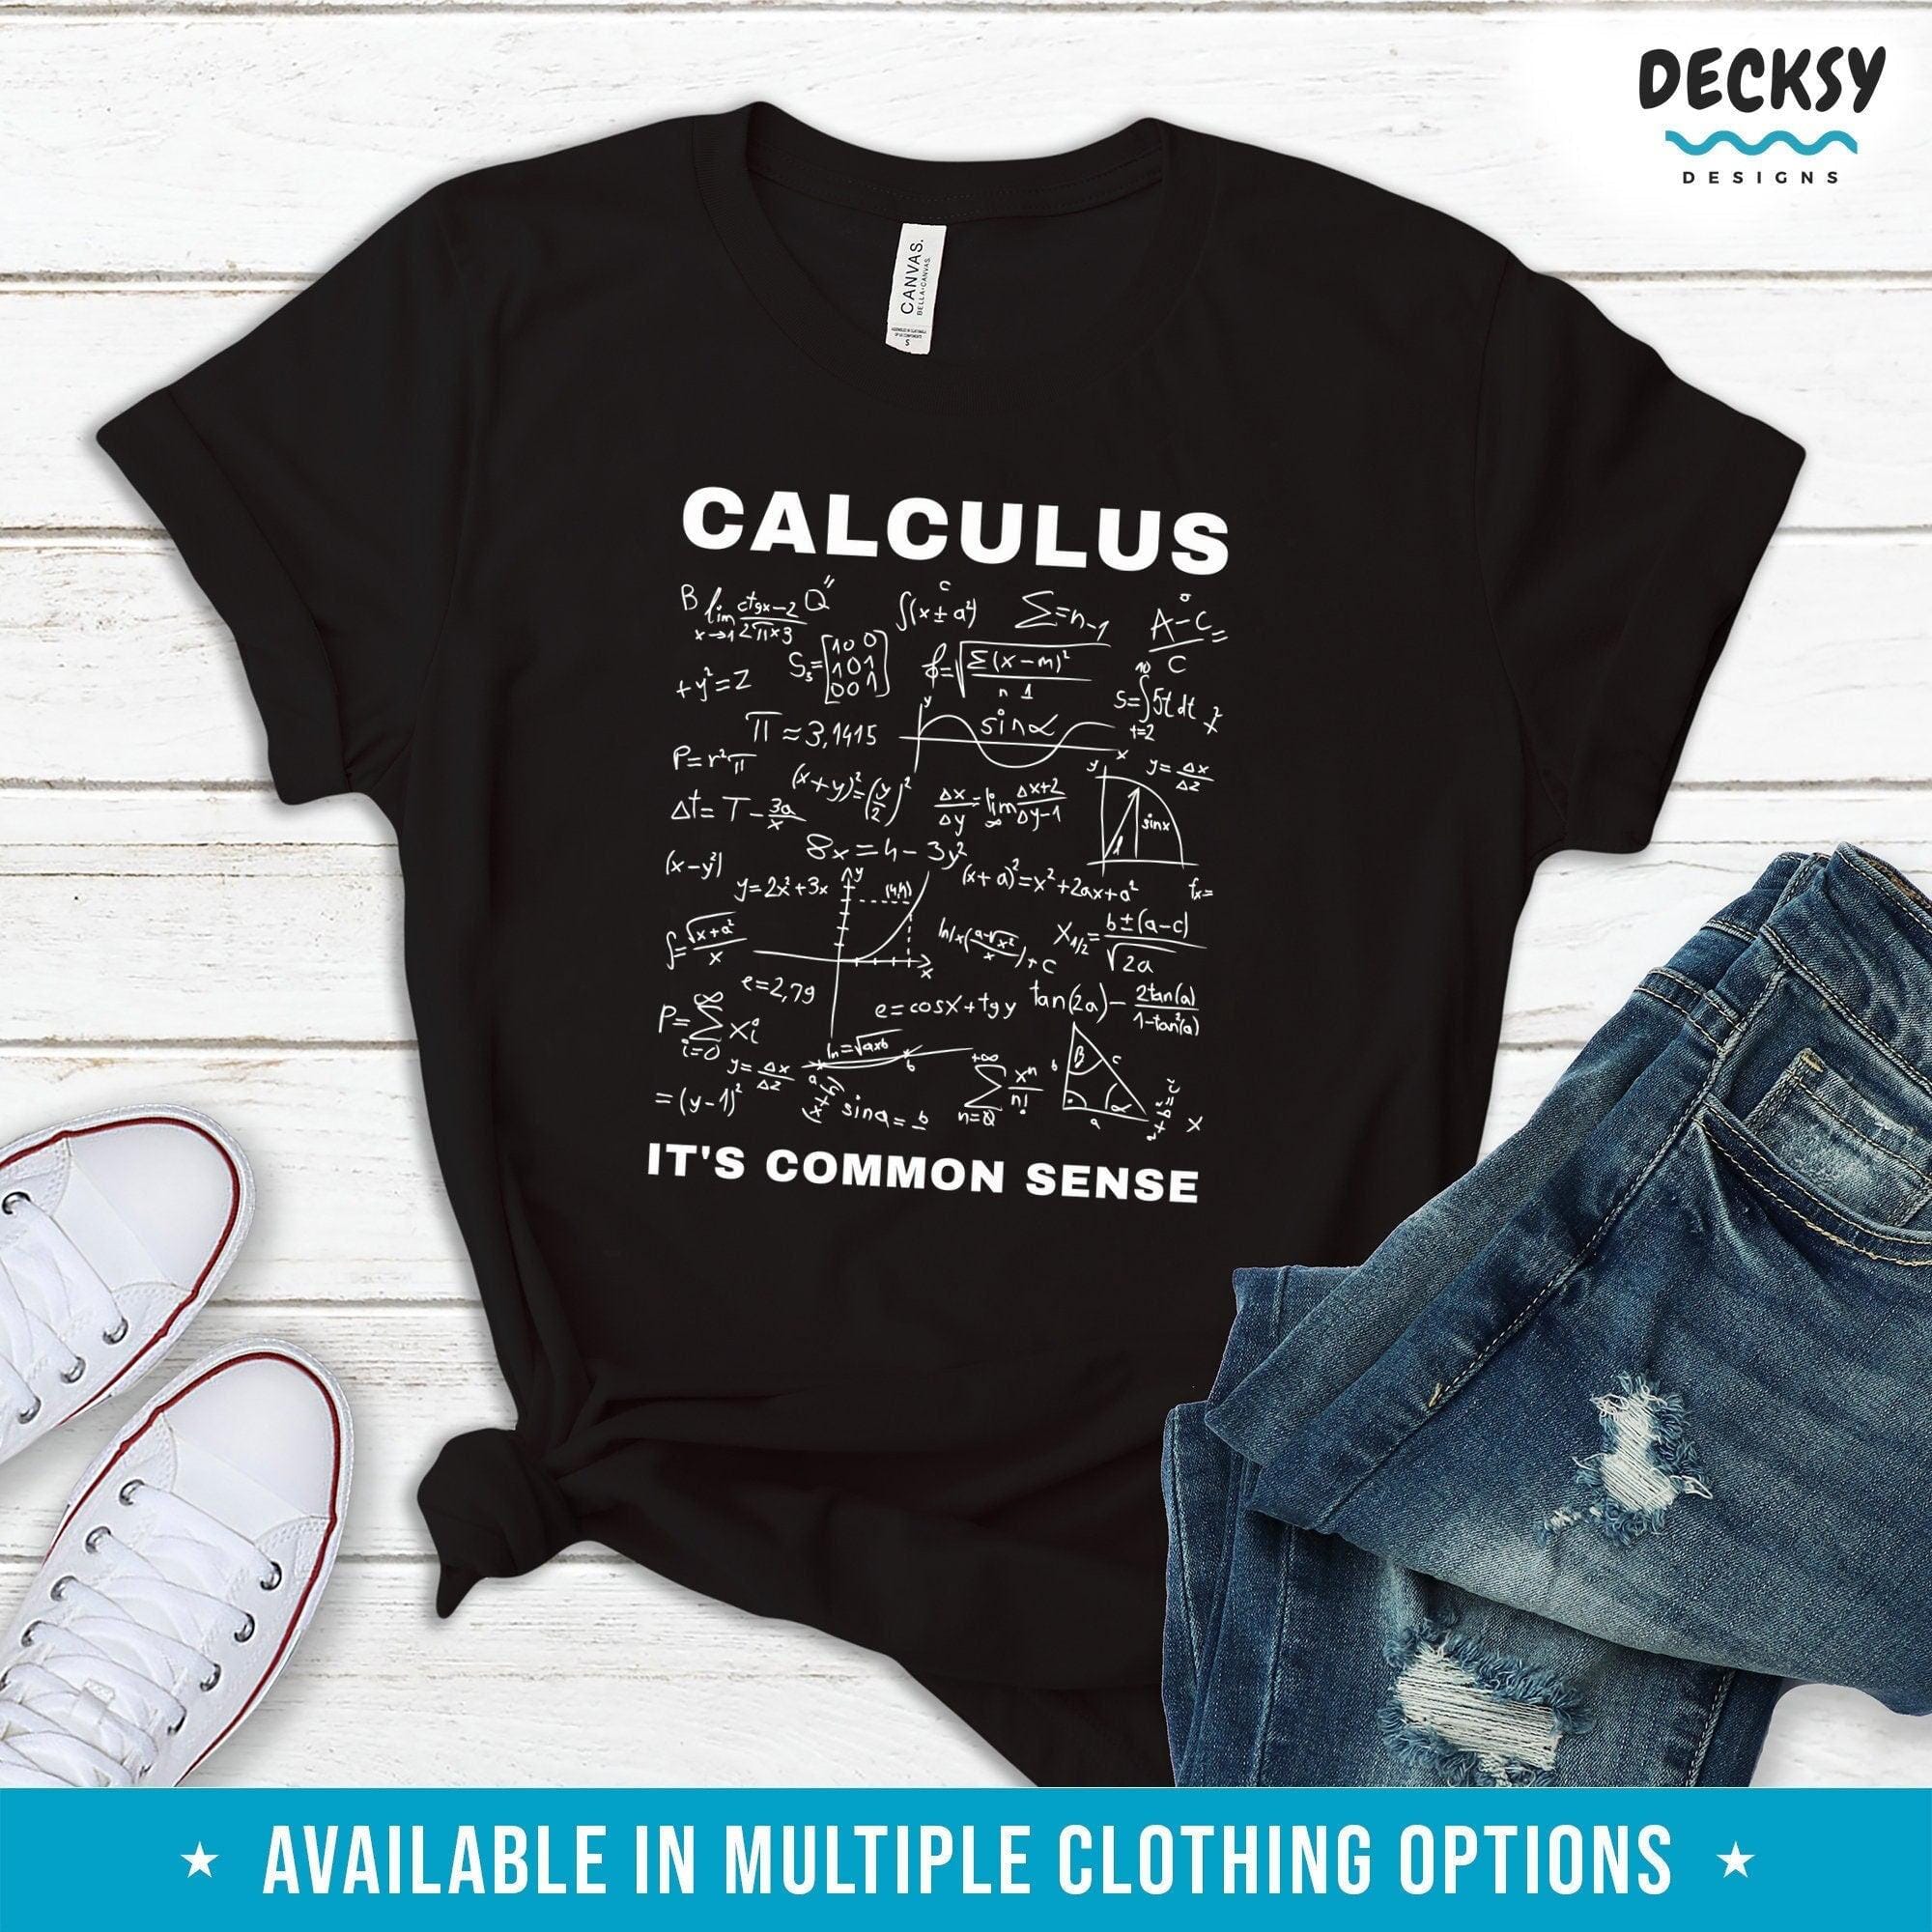 Calculus Shirt, Math Teacher Gift-Clothing:Gender-Neutral Adult Clothing:Tops & Tees:T-shirts:Graphic Tees-DecksyDesigns